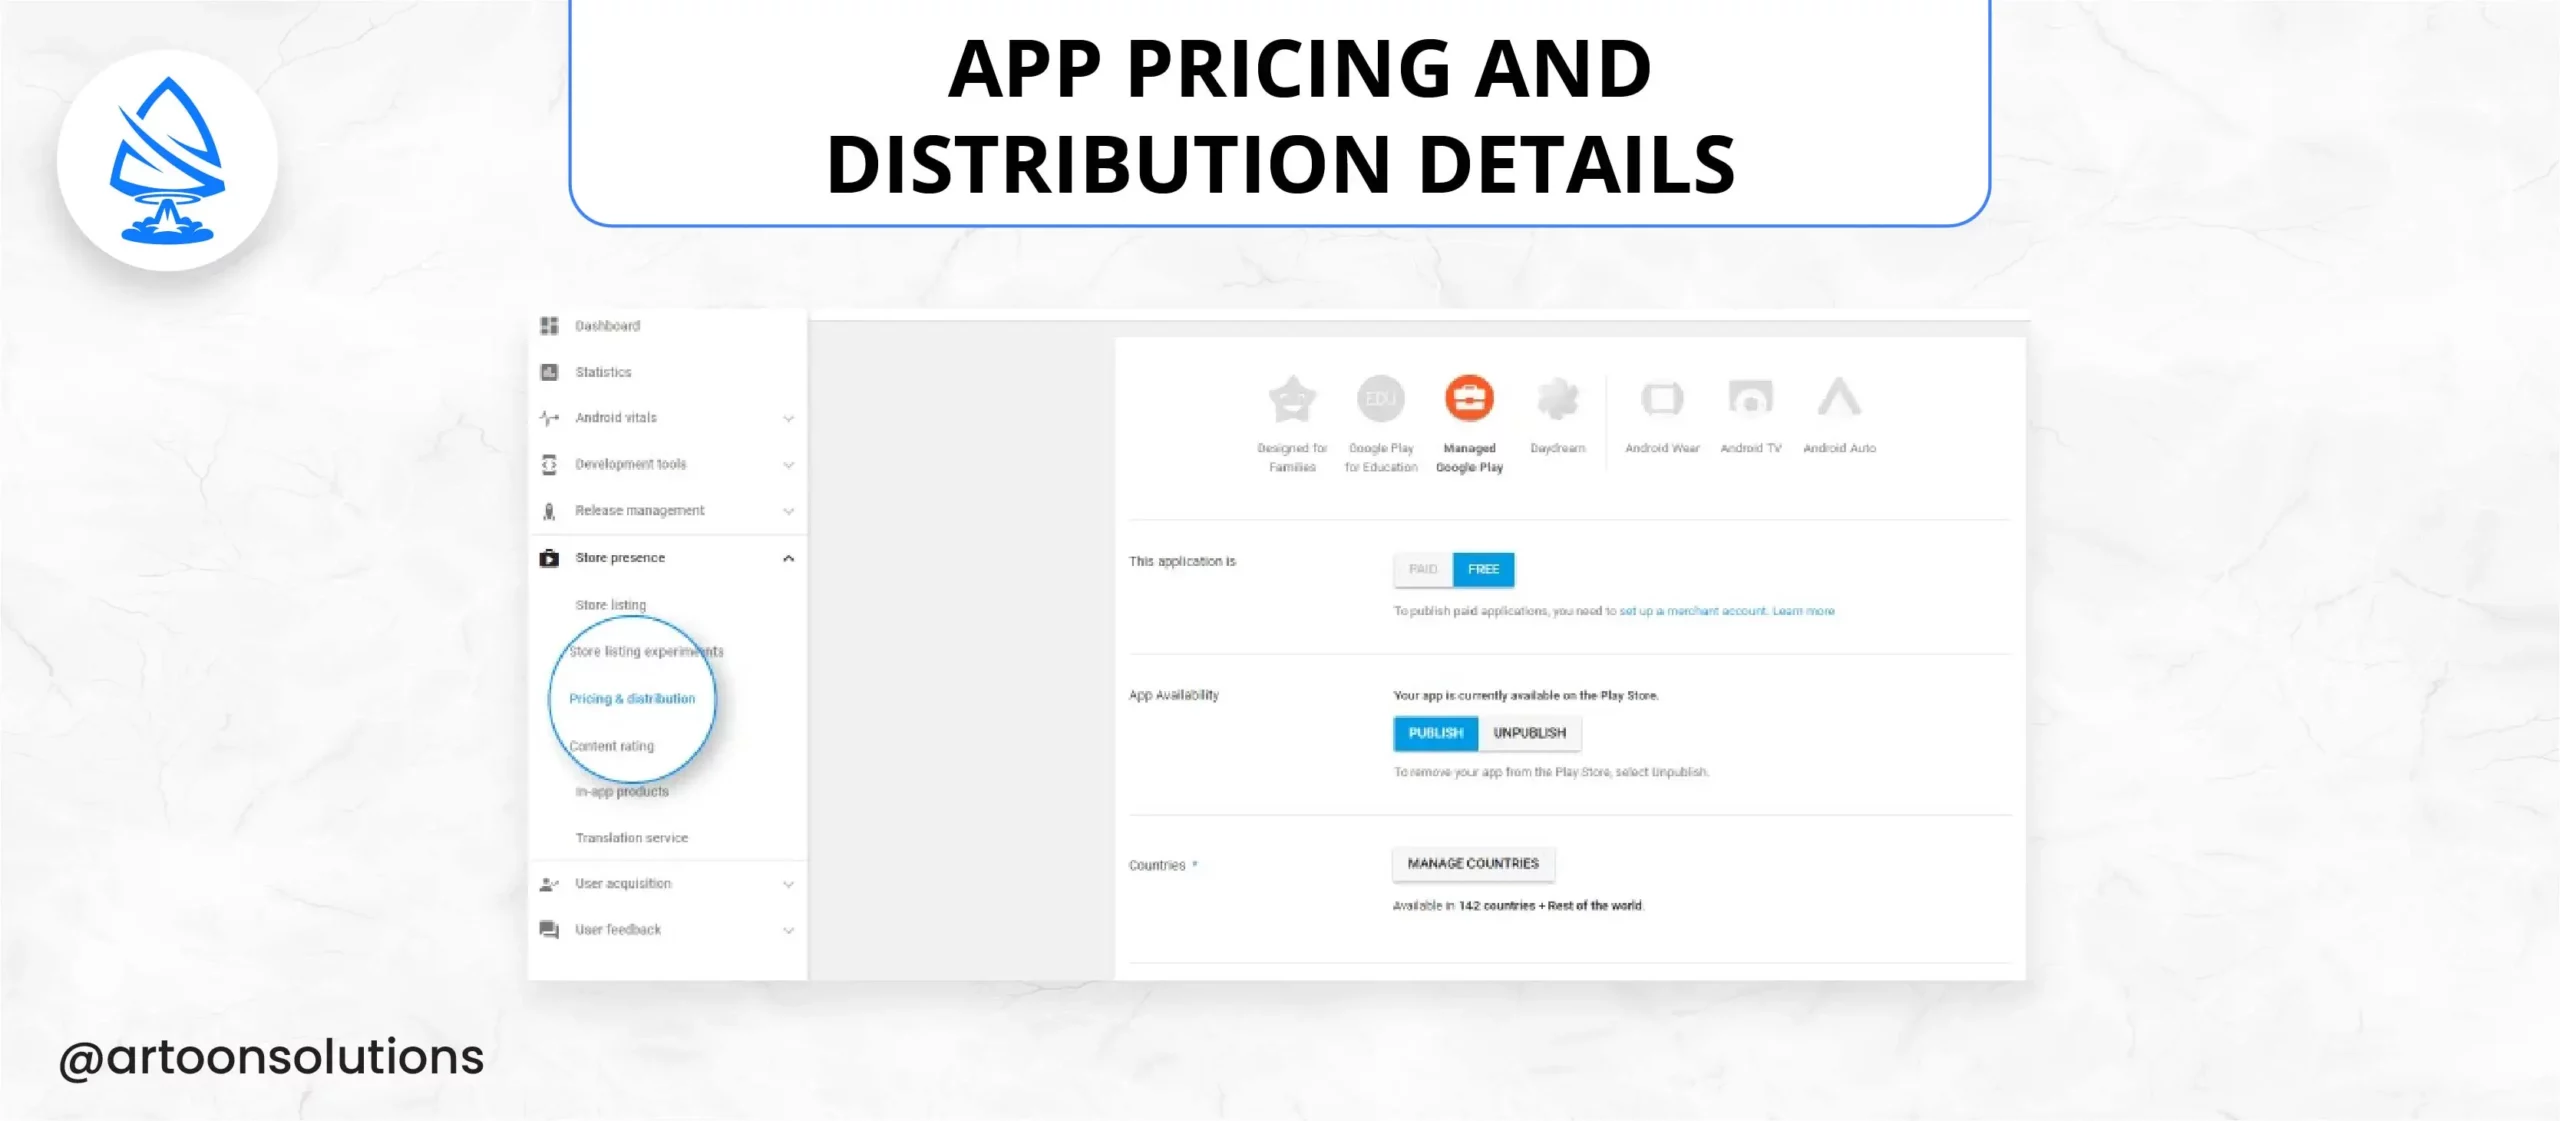 App Pricing and Distribution Details